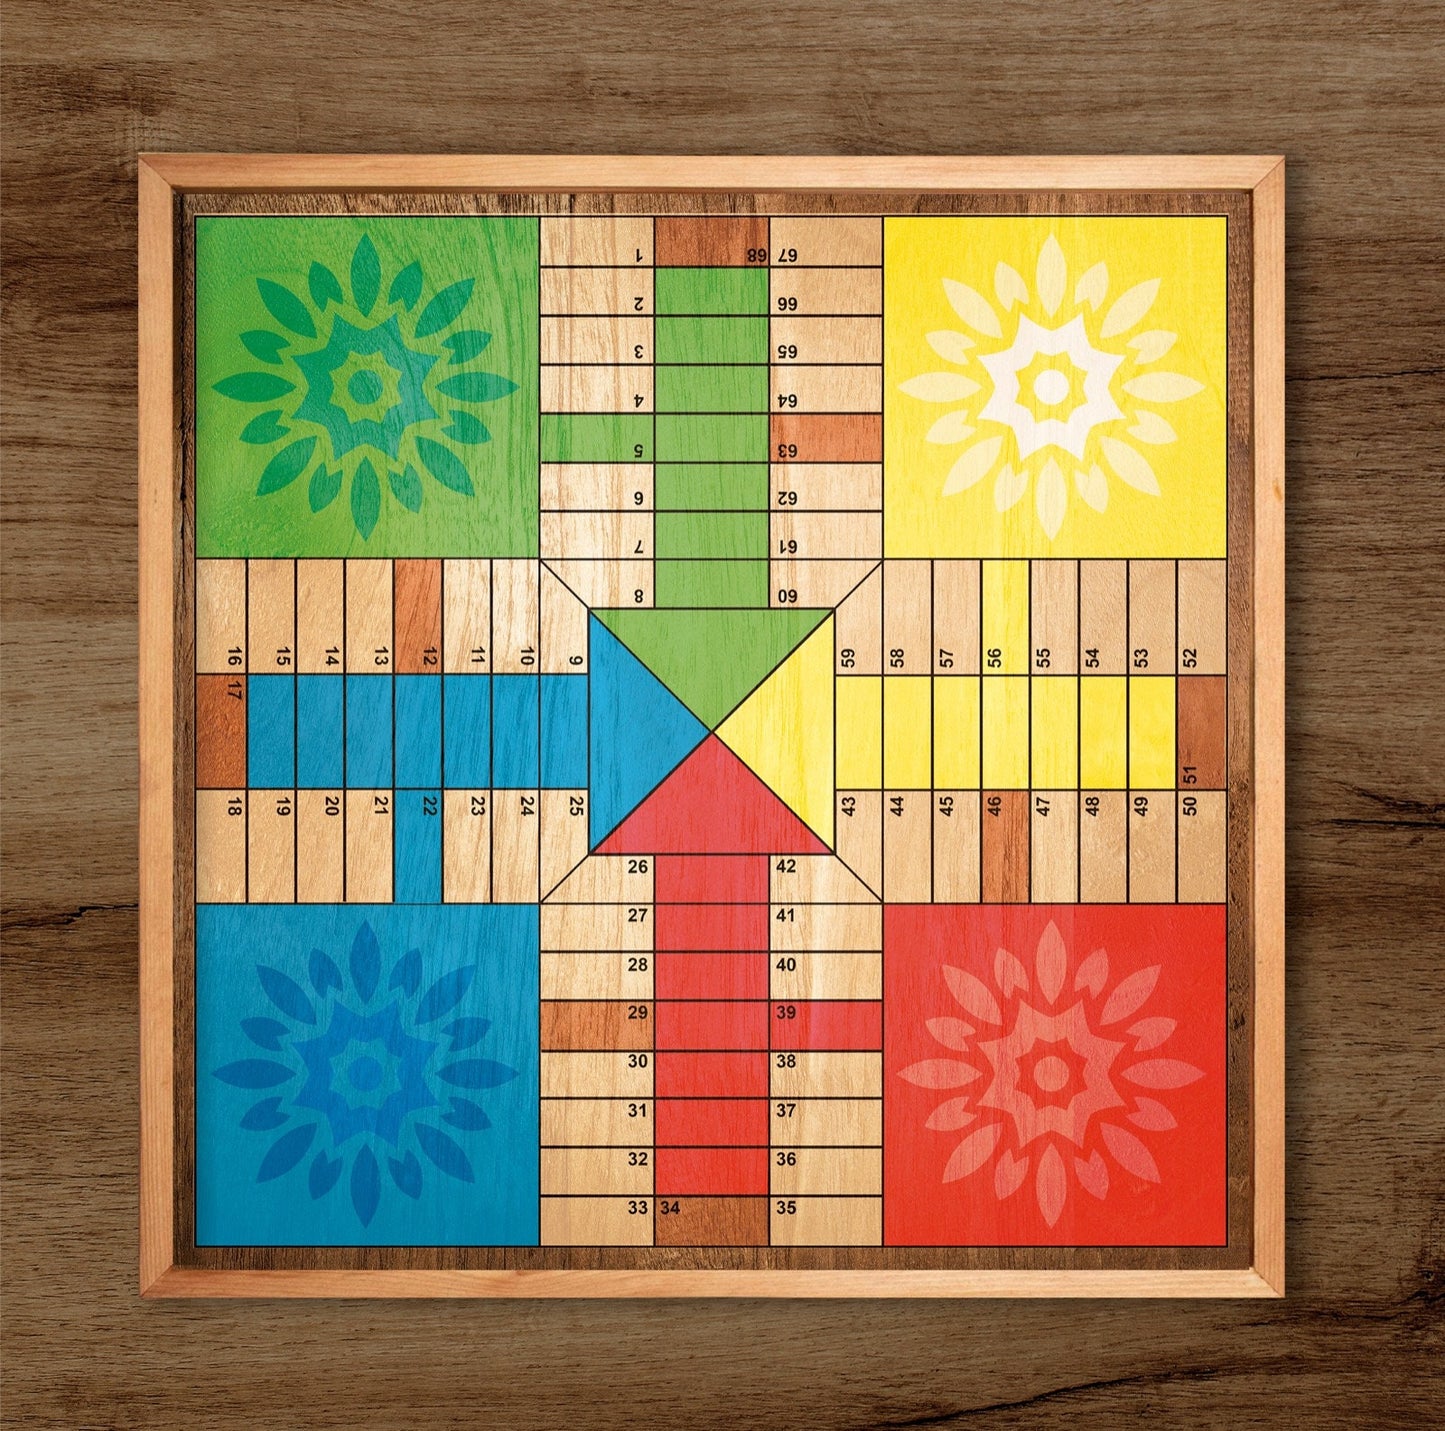 Parcheesi Board for 4 players - ORIGINAL CLASSIC BOARD. Hand Made with wood & Resin. Yellow ,Blue, Green, Red Colors